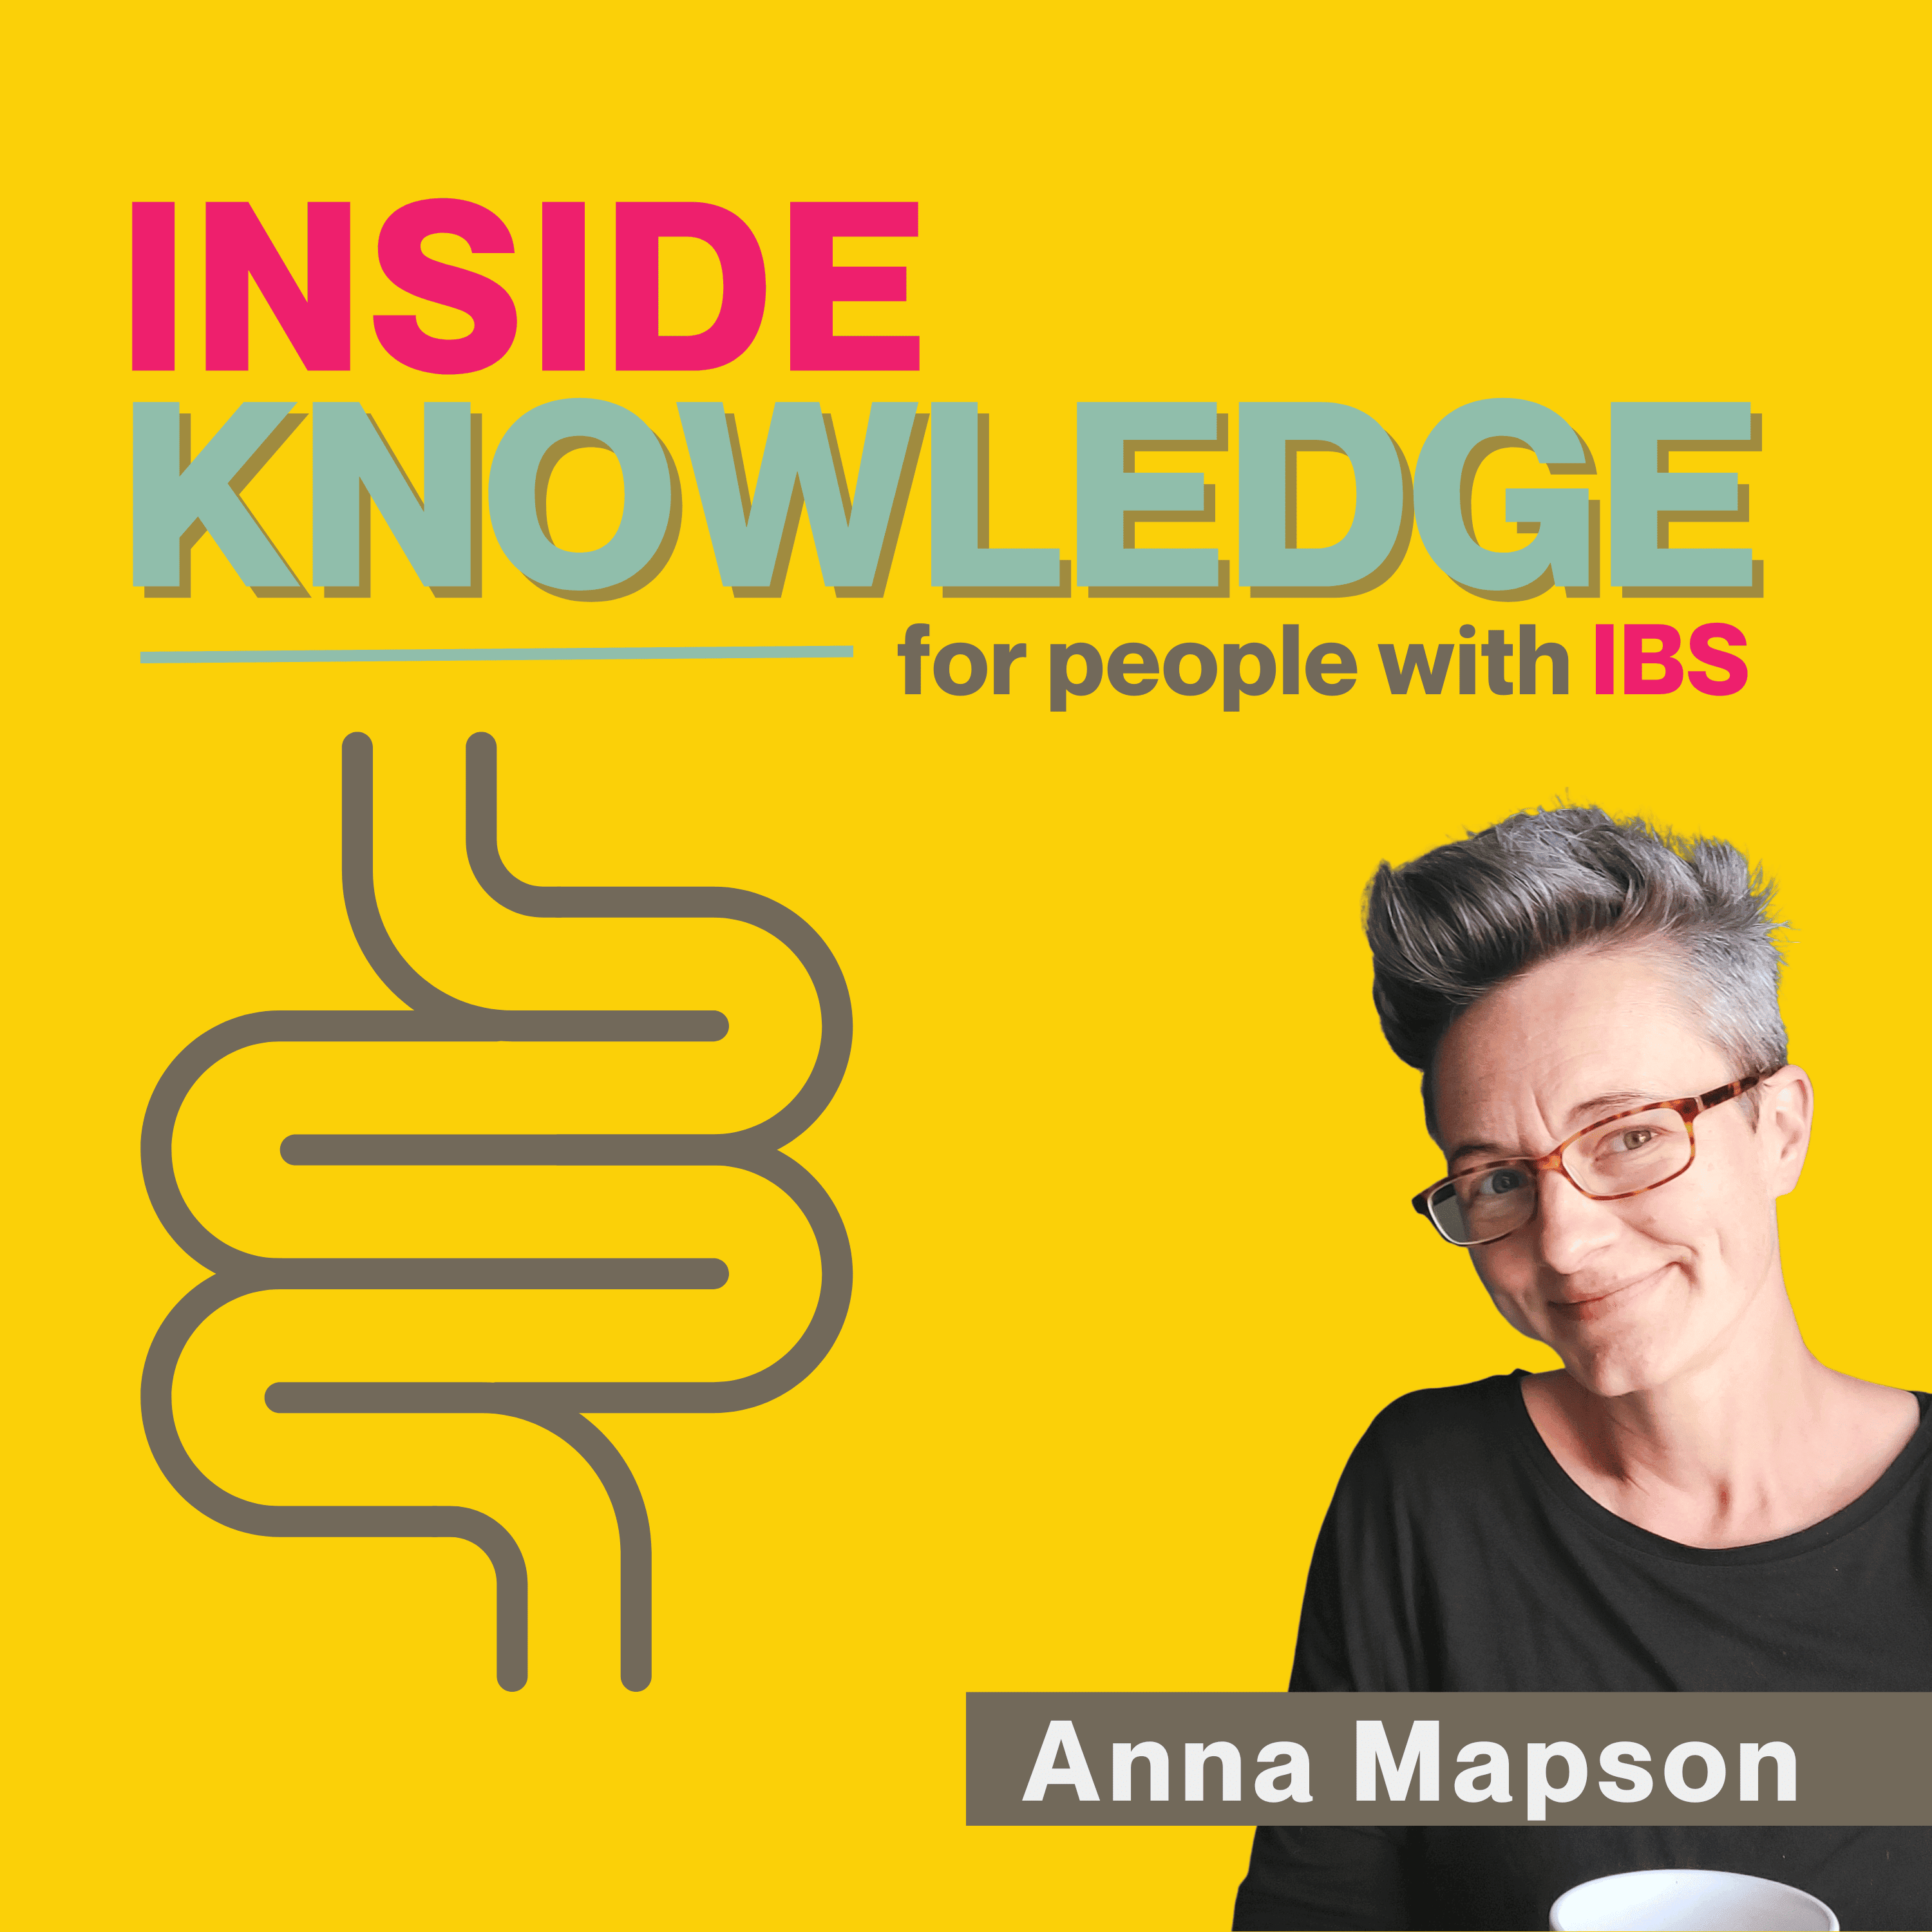 a gold yellow background, the words Inside Knowledge for people with IBS, a small simplified sketch of a gut, and photo of Anna Mapson, a white woman smiling, with short cropped grey hair and a quiff, wearing glasses and a black top.